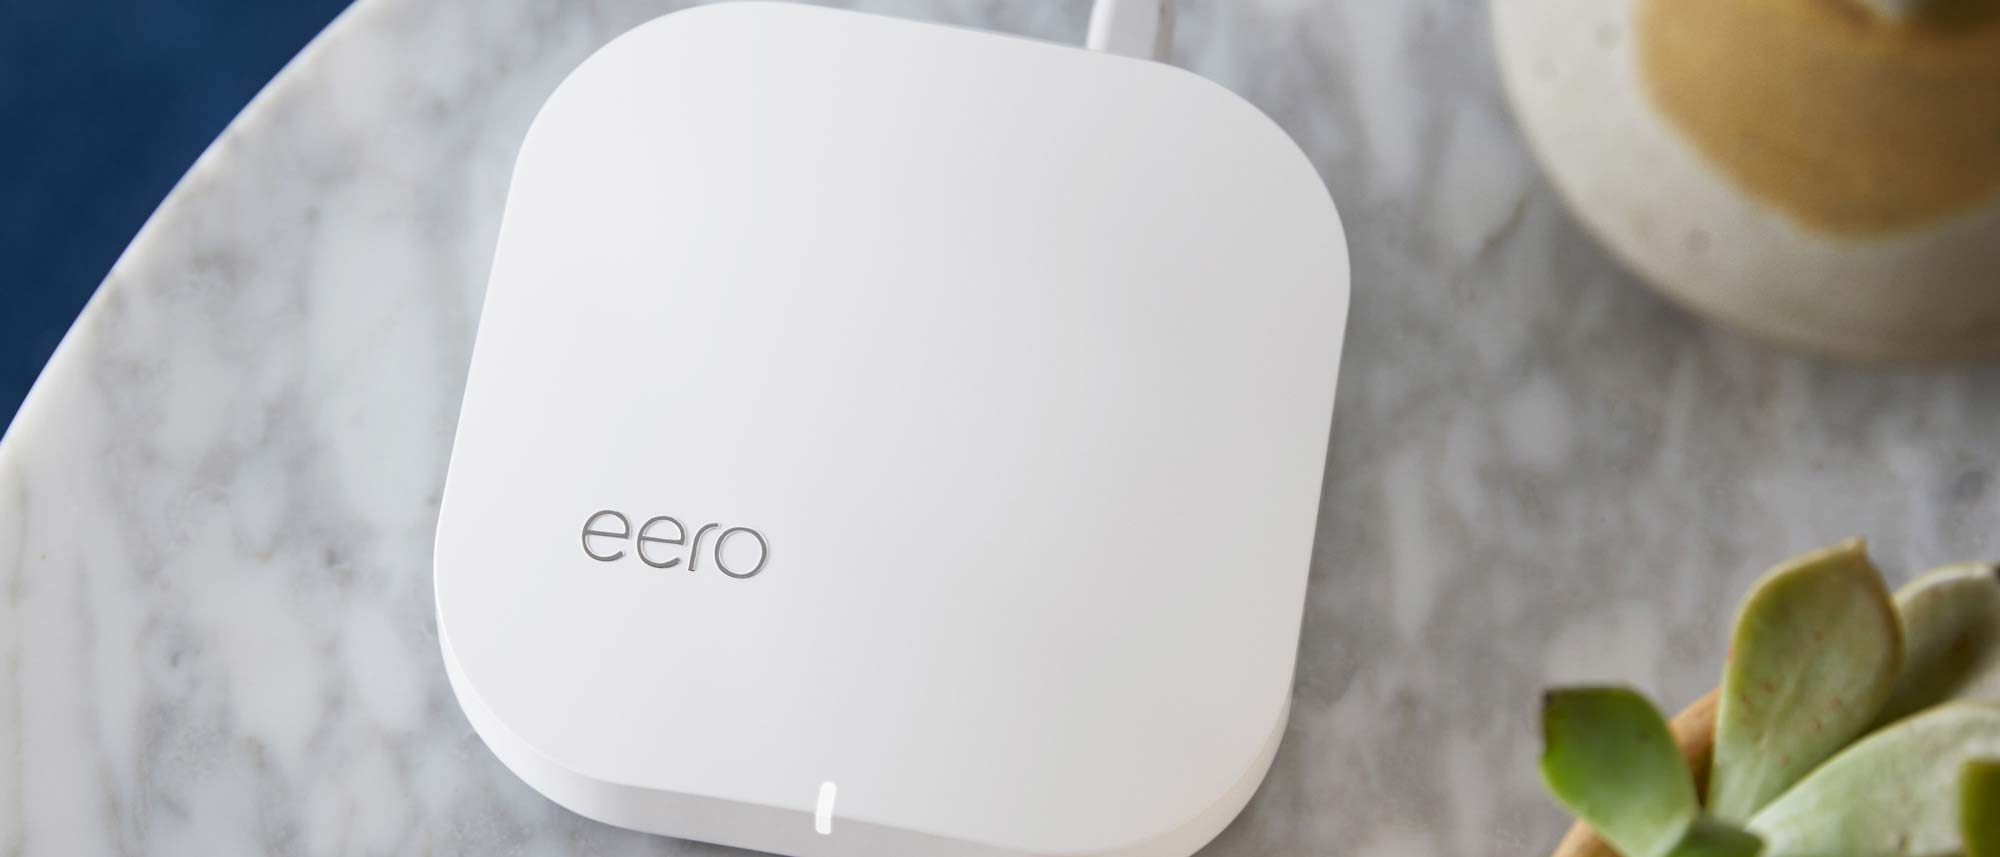 Coverage: 1 to 2 Bedroom Home Advanced Tri-Band Mesh WiFi System to Replace Traditional Routers and WiFi Ranger Extenders eero Home WiFi System 1 eero Pro + 1 eero Beacon 